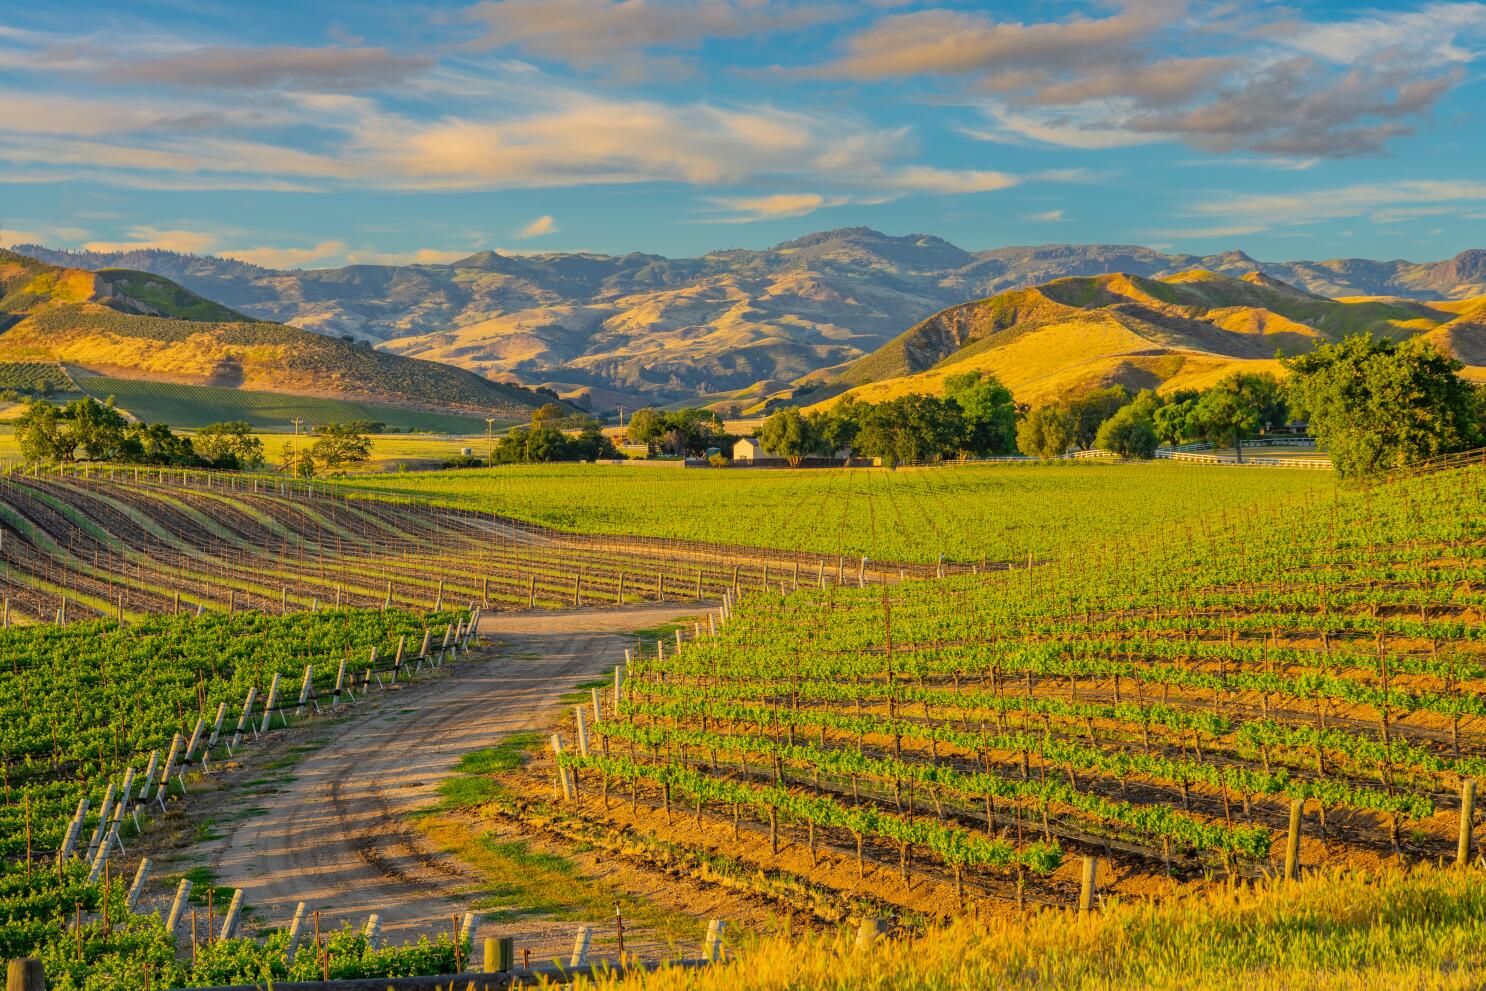 Napa Valley, Sonoma Take On Outdoorsy Luxury With New Hotels & Restaurants  - Bloomberg